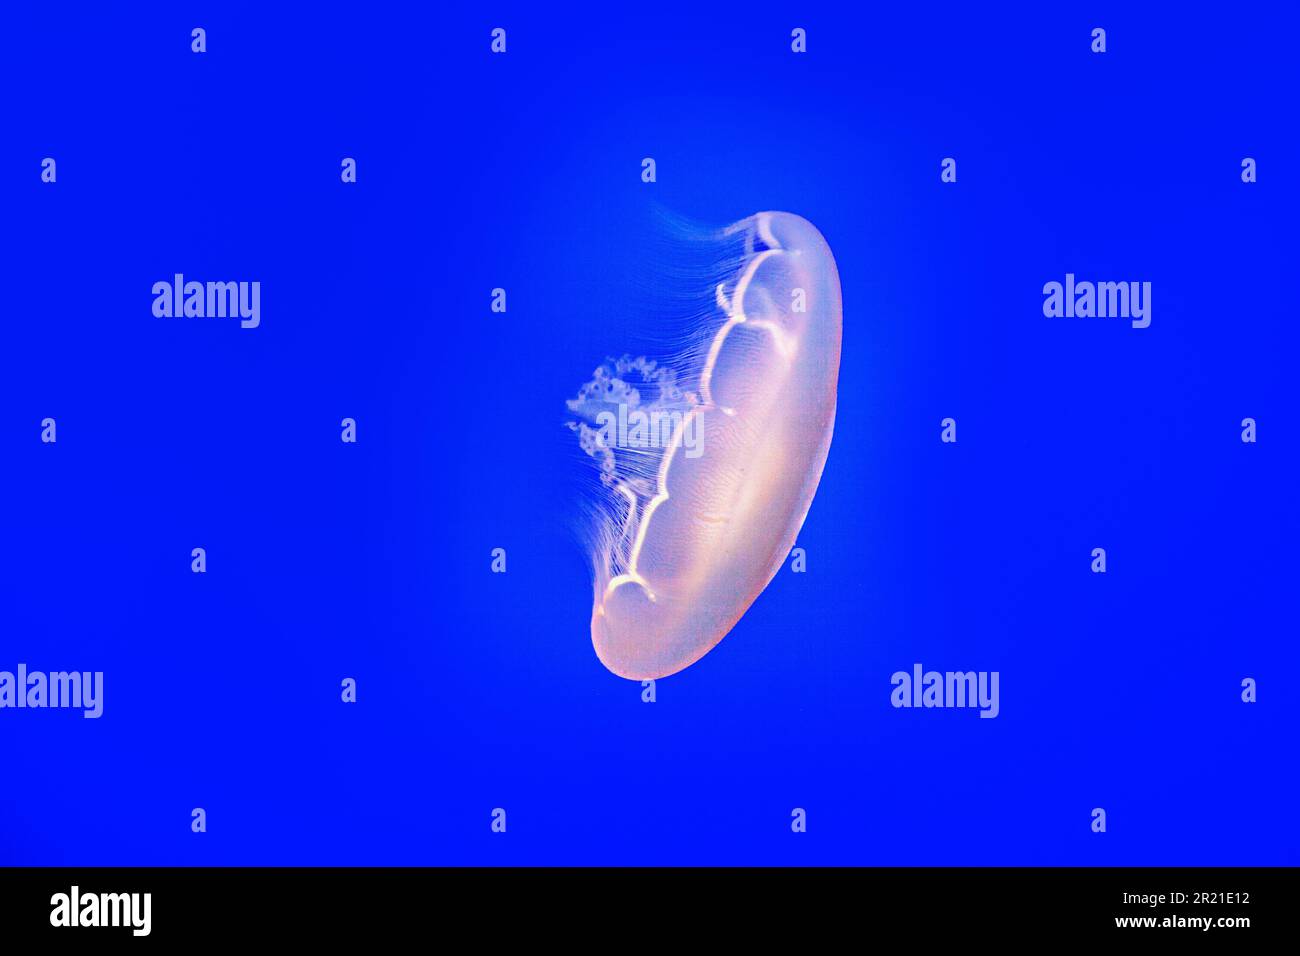 transparent jelly fish in the deap blue sea Stock Photo